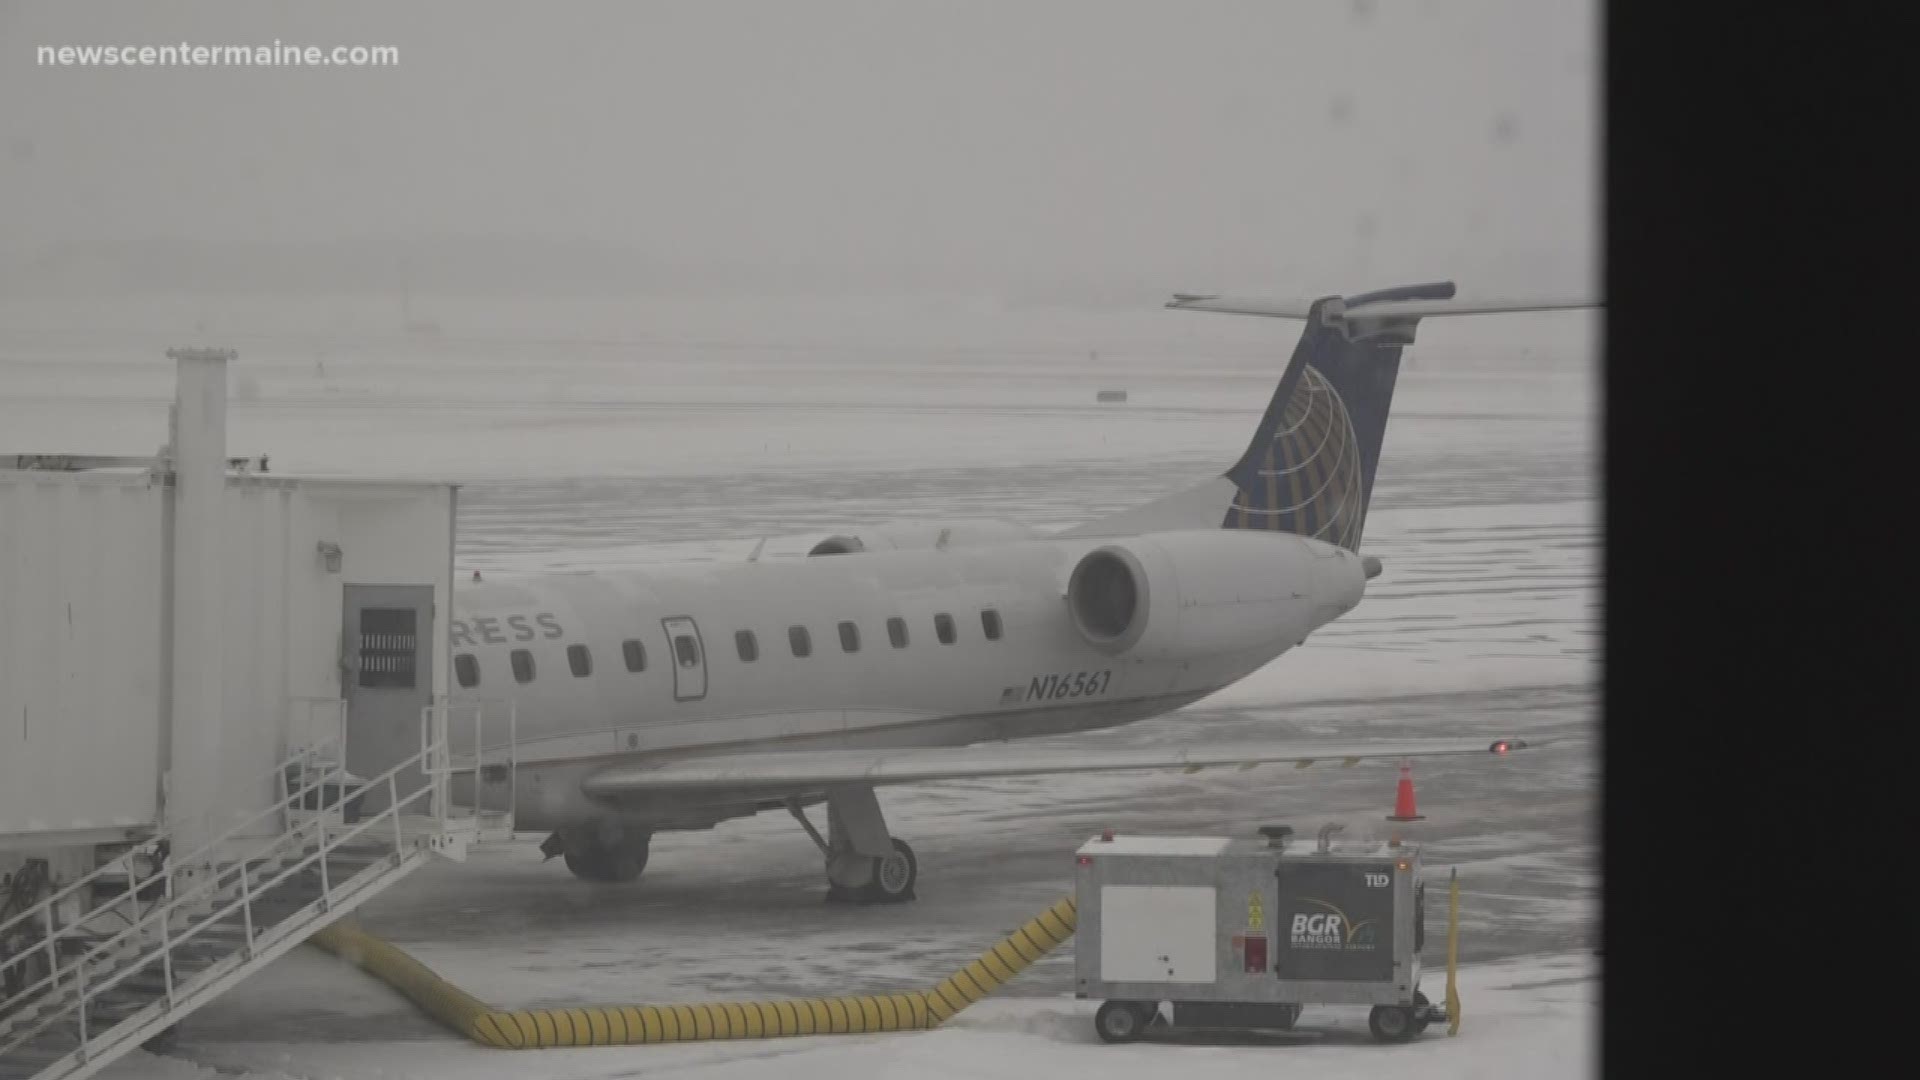 Some Thanksgiving travelers are still stuck in Bangor due to recent snowstorms.